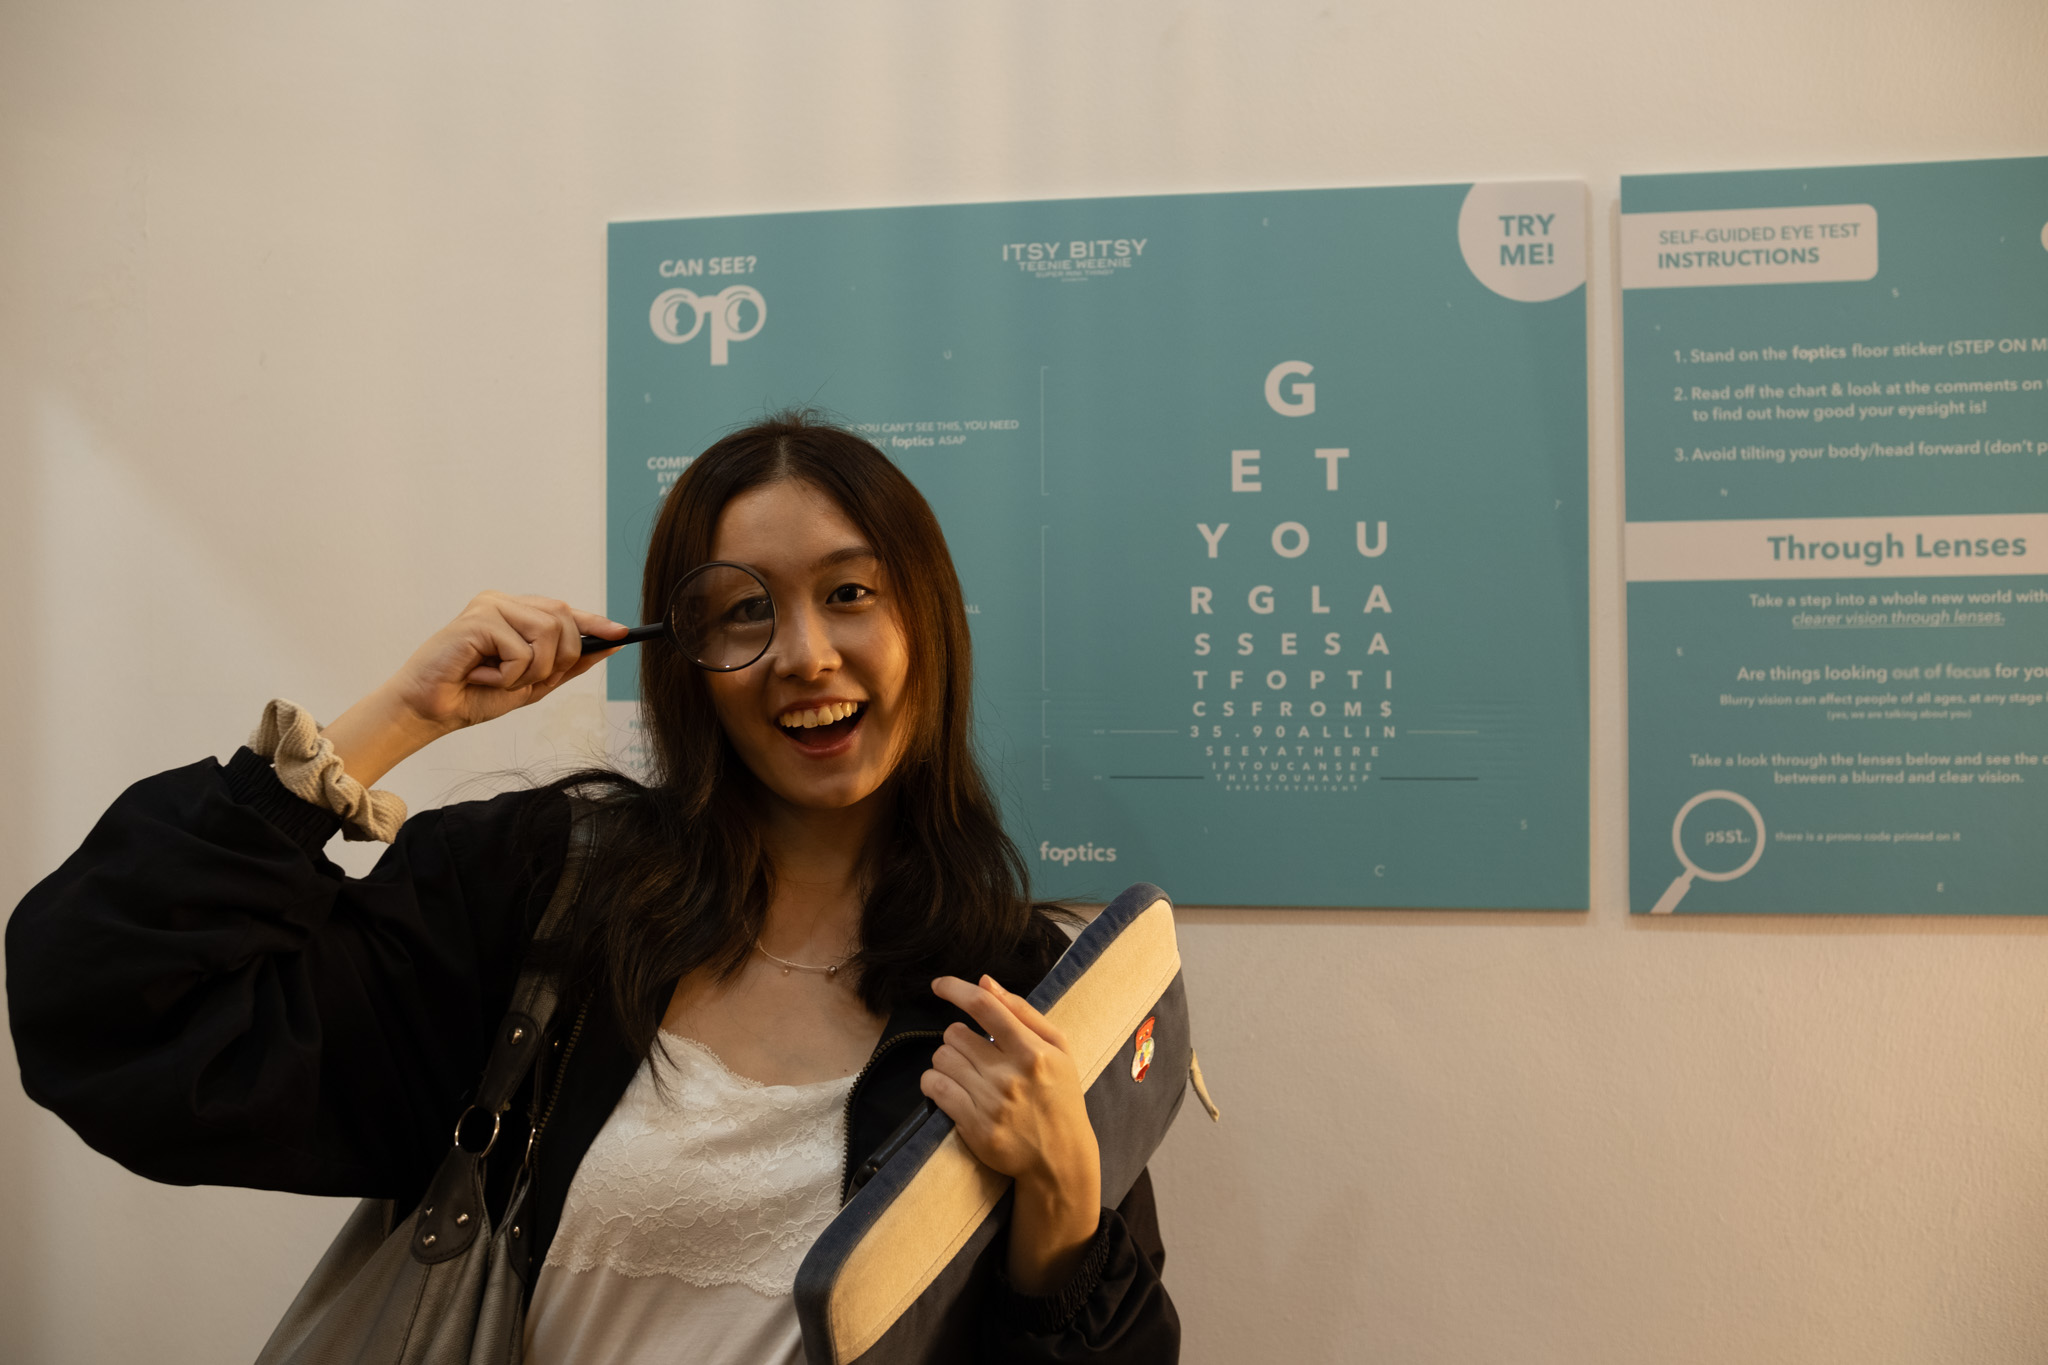 Our editor, Isabelle, posing with the free magnifying glass in front of the foptics showcase. Photo Credit: Josiah Lee